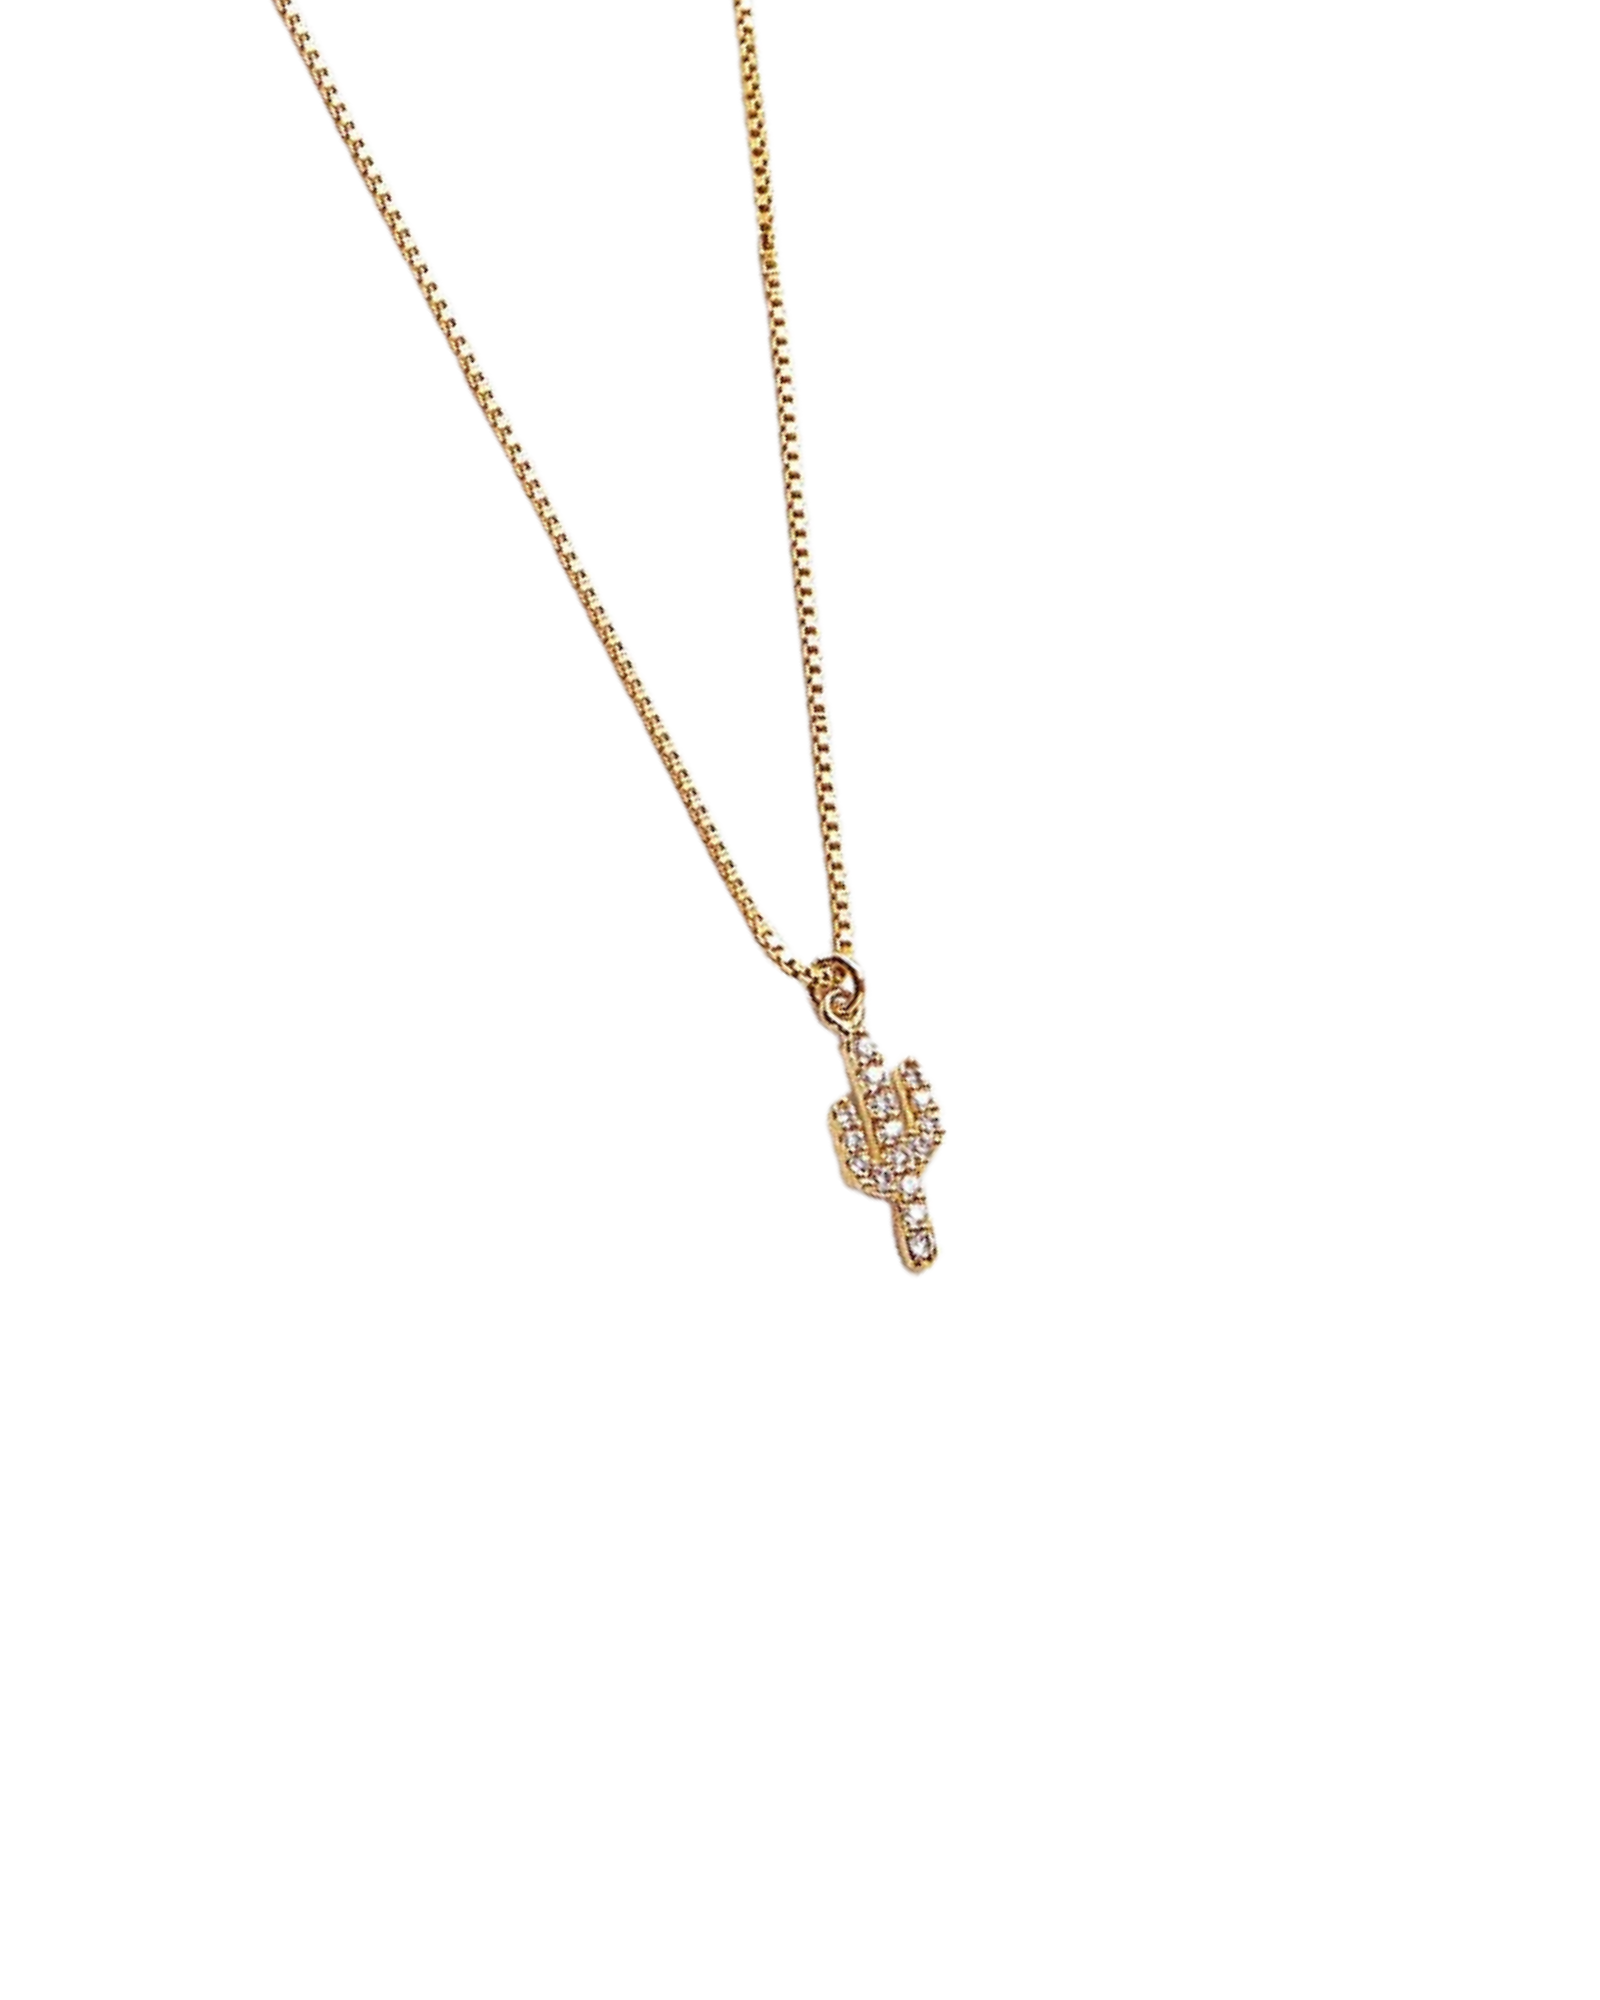 Small gold saguaro cactus necklace with crystals covering the cactus on a gold chain